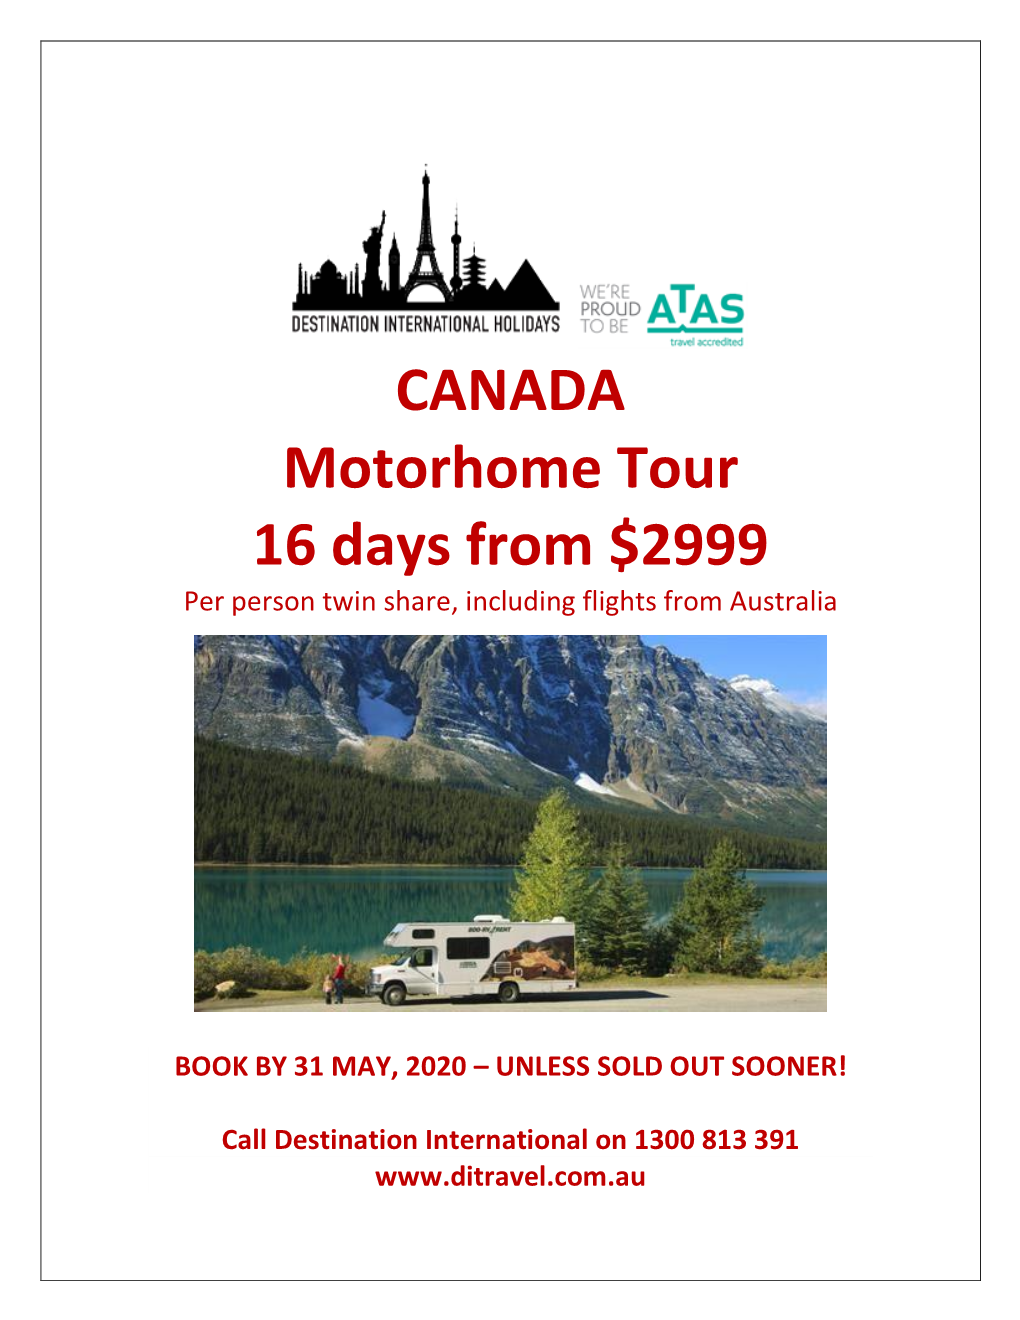 CANADA Motorhome Tour 16 Days from $2999 Per Person Twin Share, Including Flights from Australia